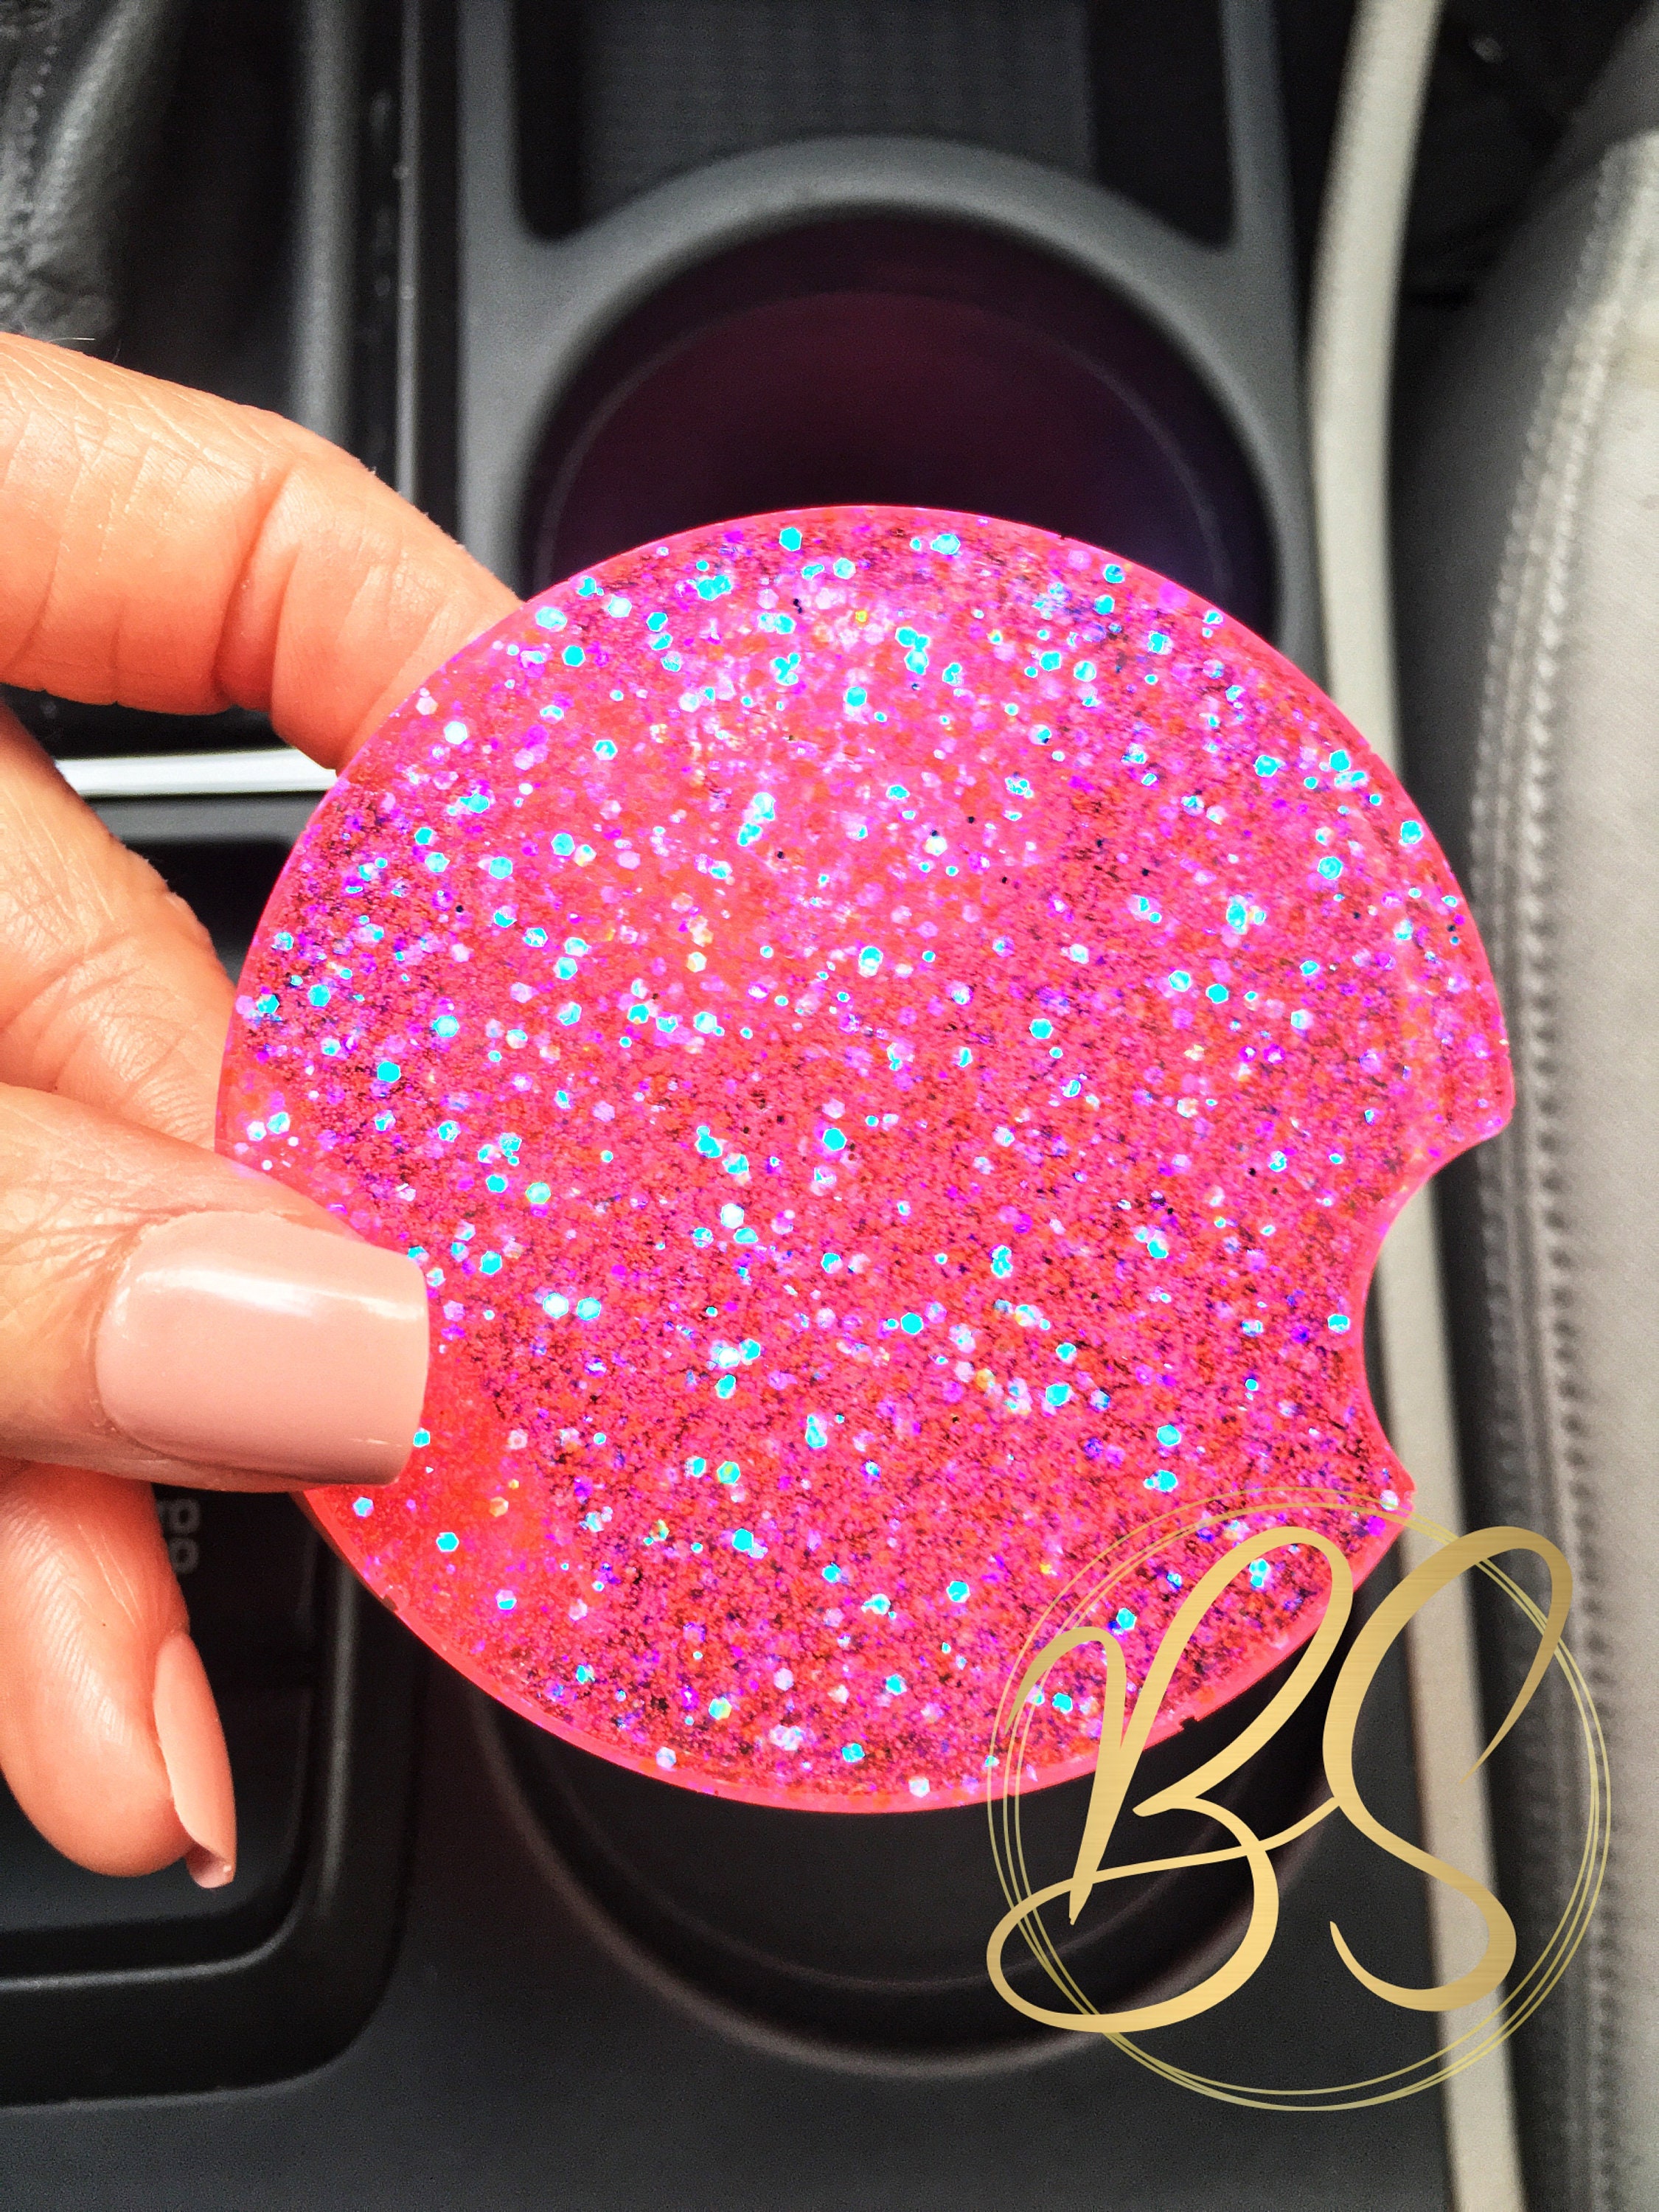 cup coaster set glittered coaster SHORT CAKE Glitter car coasters glitter cup holder coaster glitter cup holder car accessories